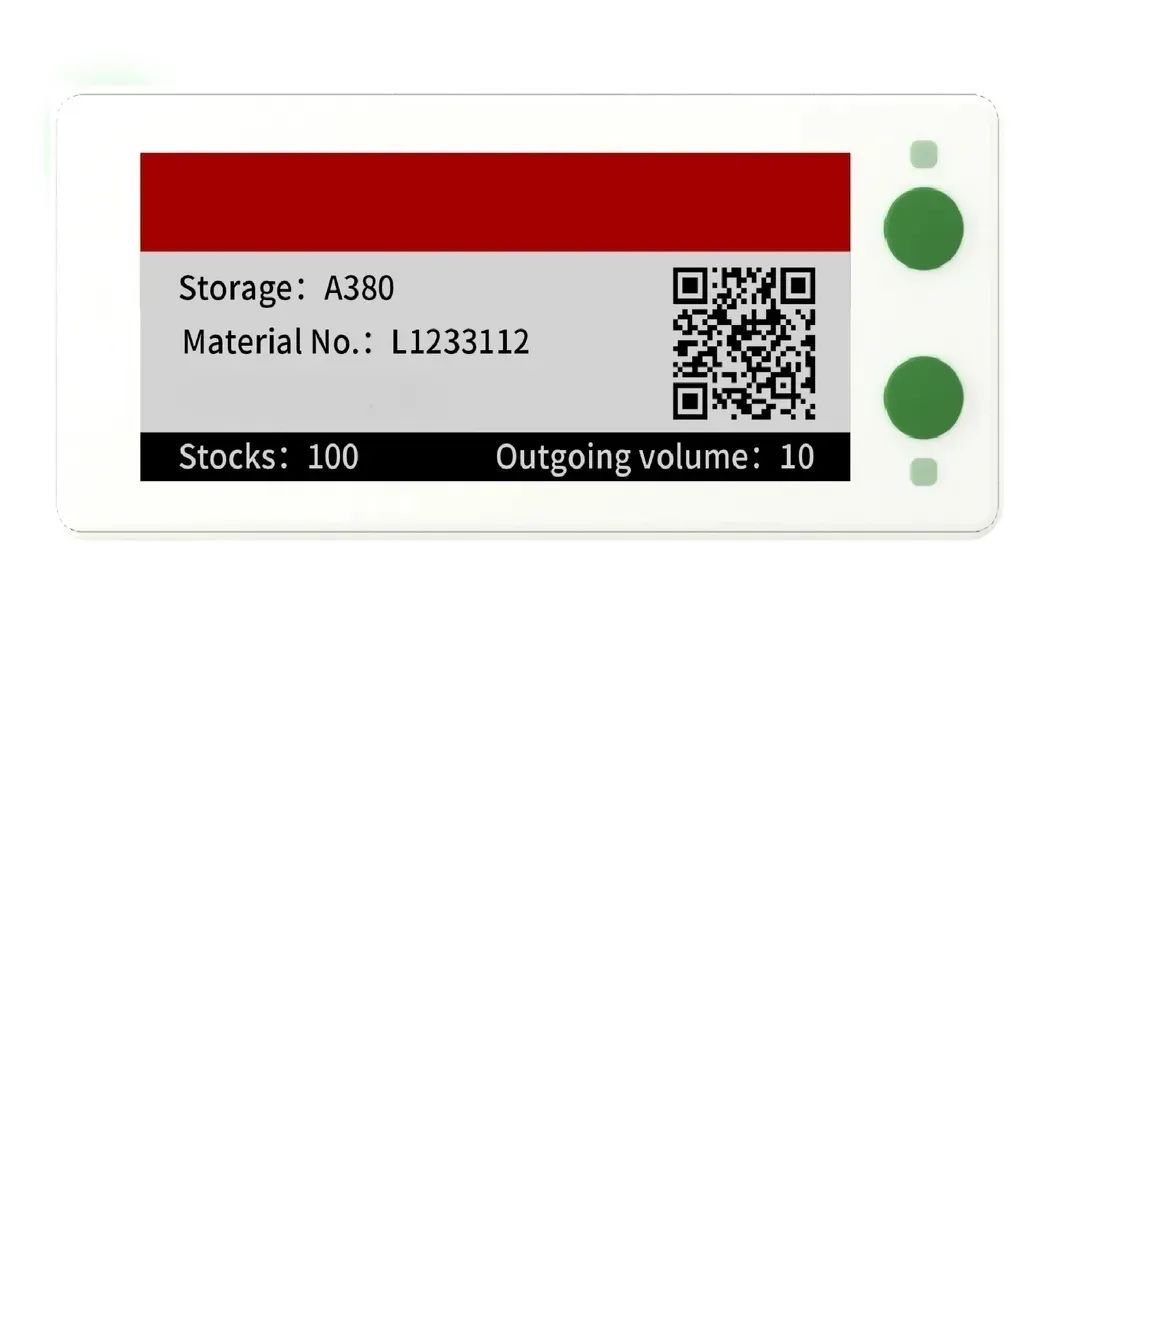 Digital Price Tags - Most reliable Electronic Shelf Label System